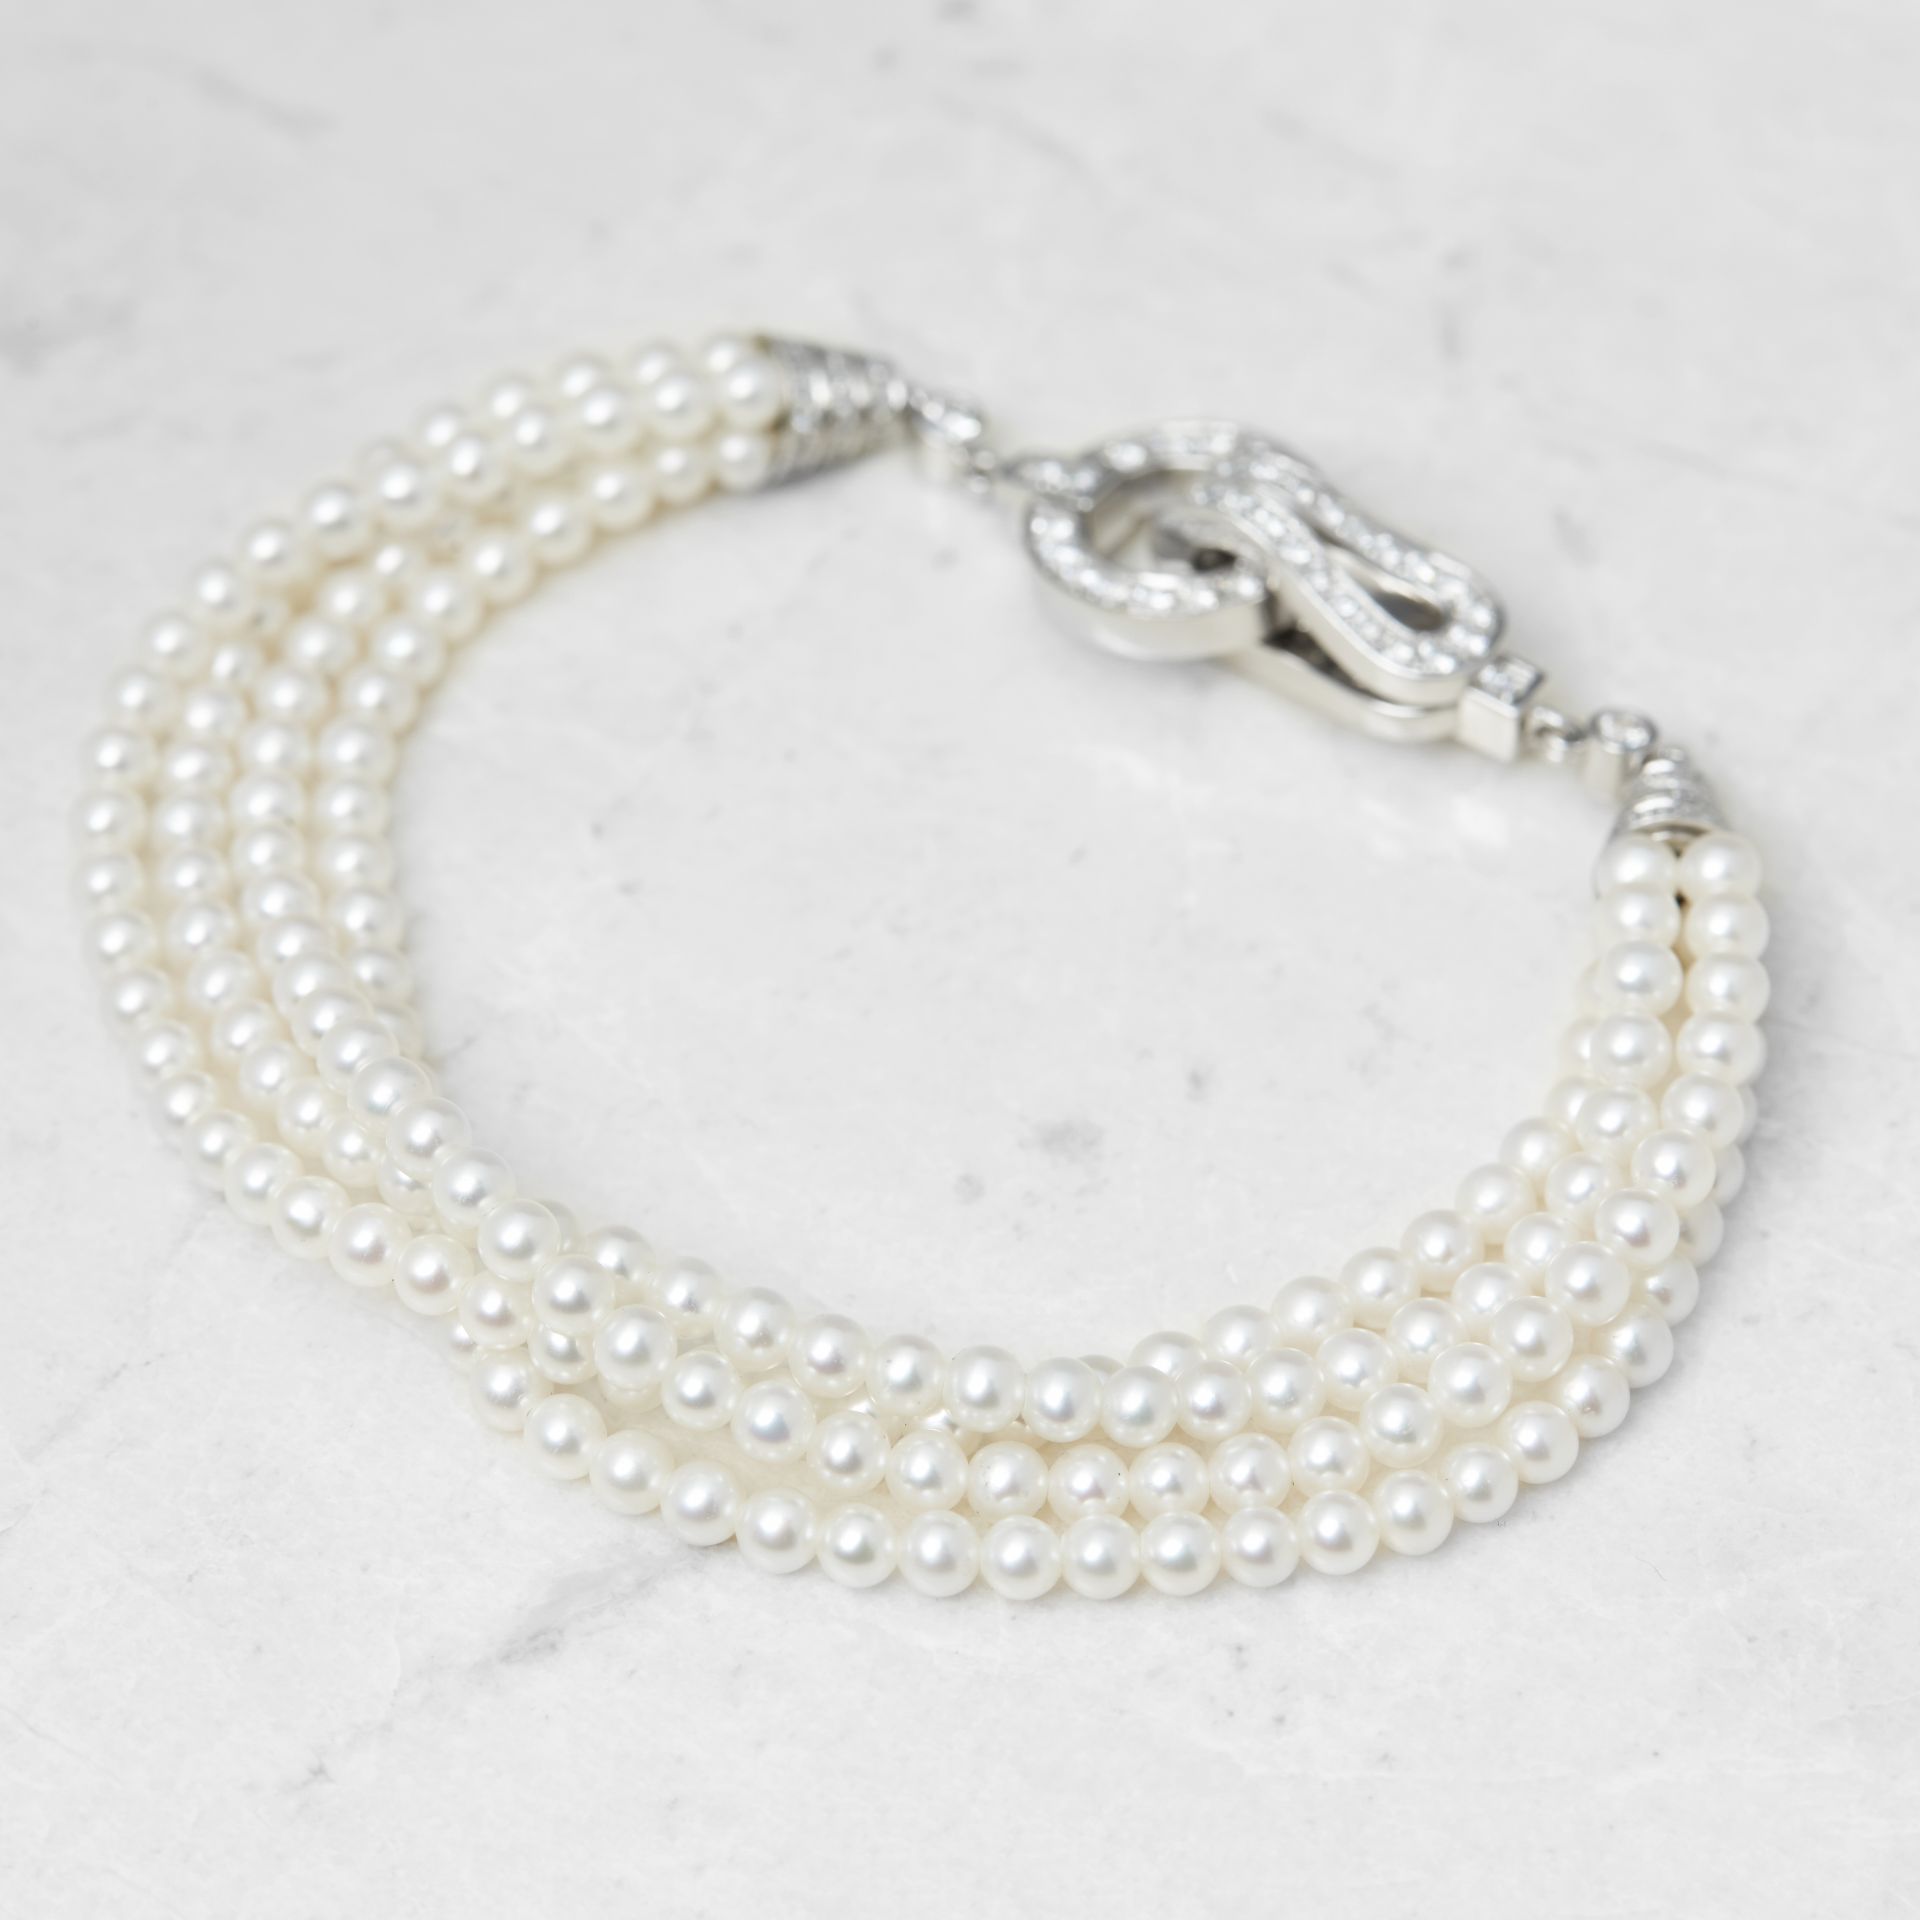 Cartier 18k White Gold Cultured Pearl & 1.02ct Diamond Agrafe Bracelet - Image 3 of 7